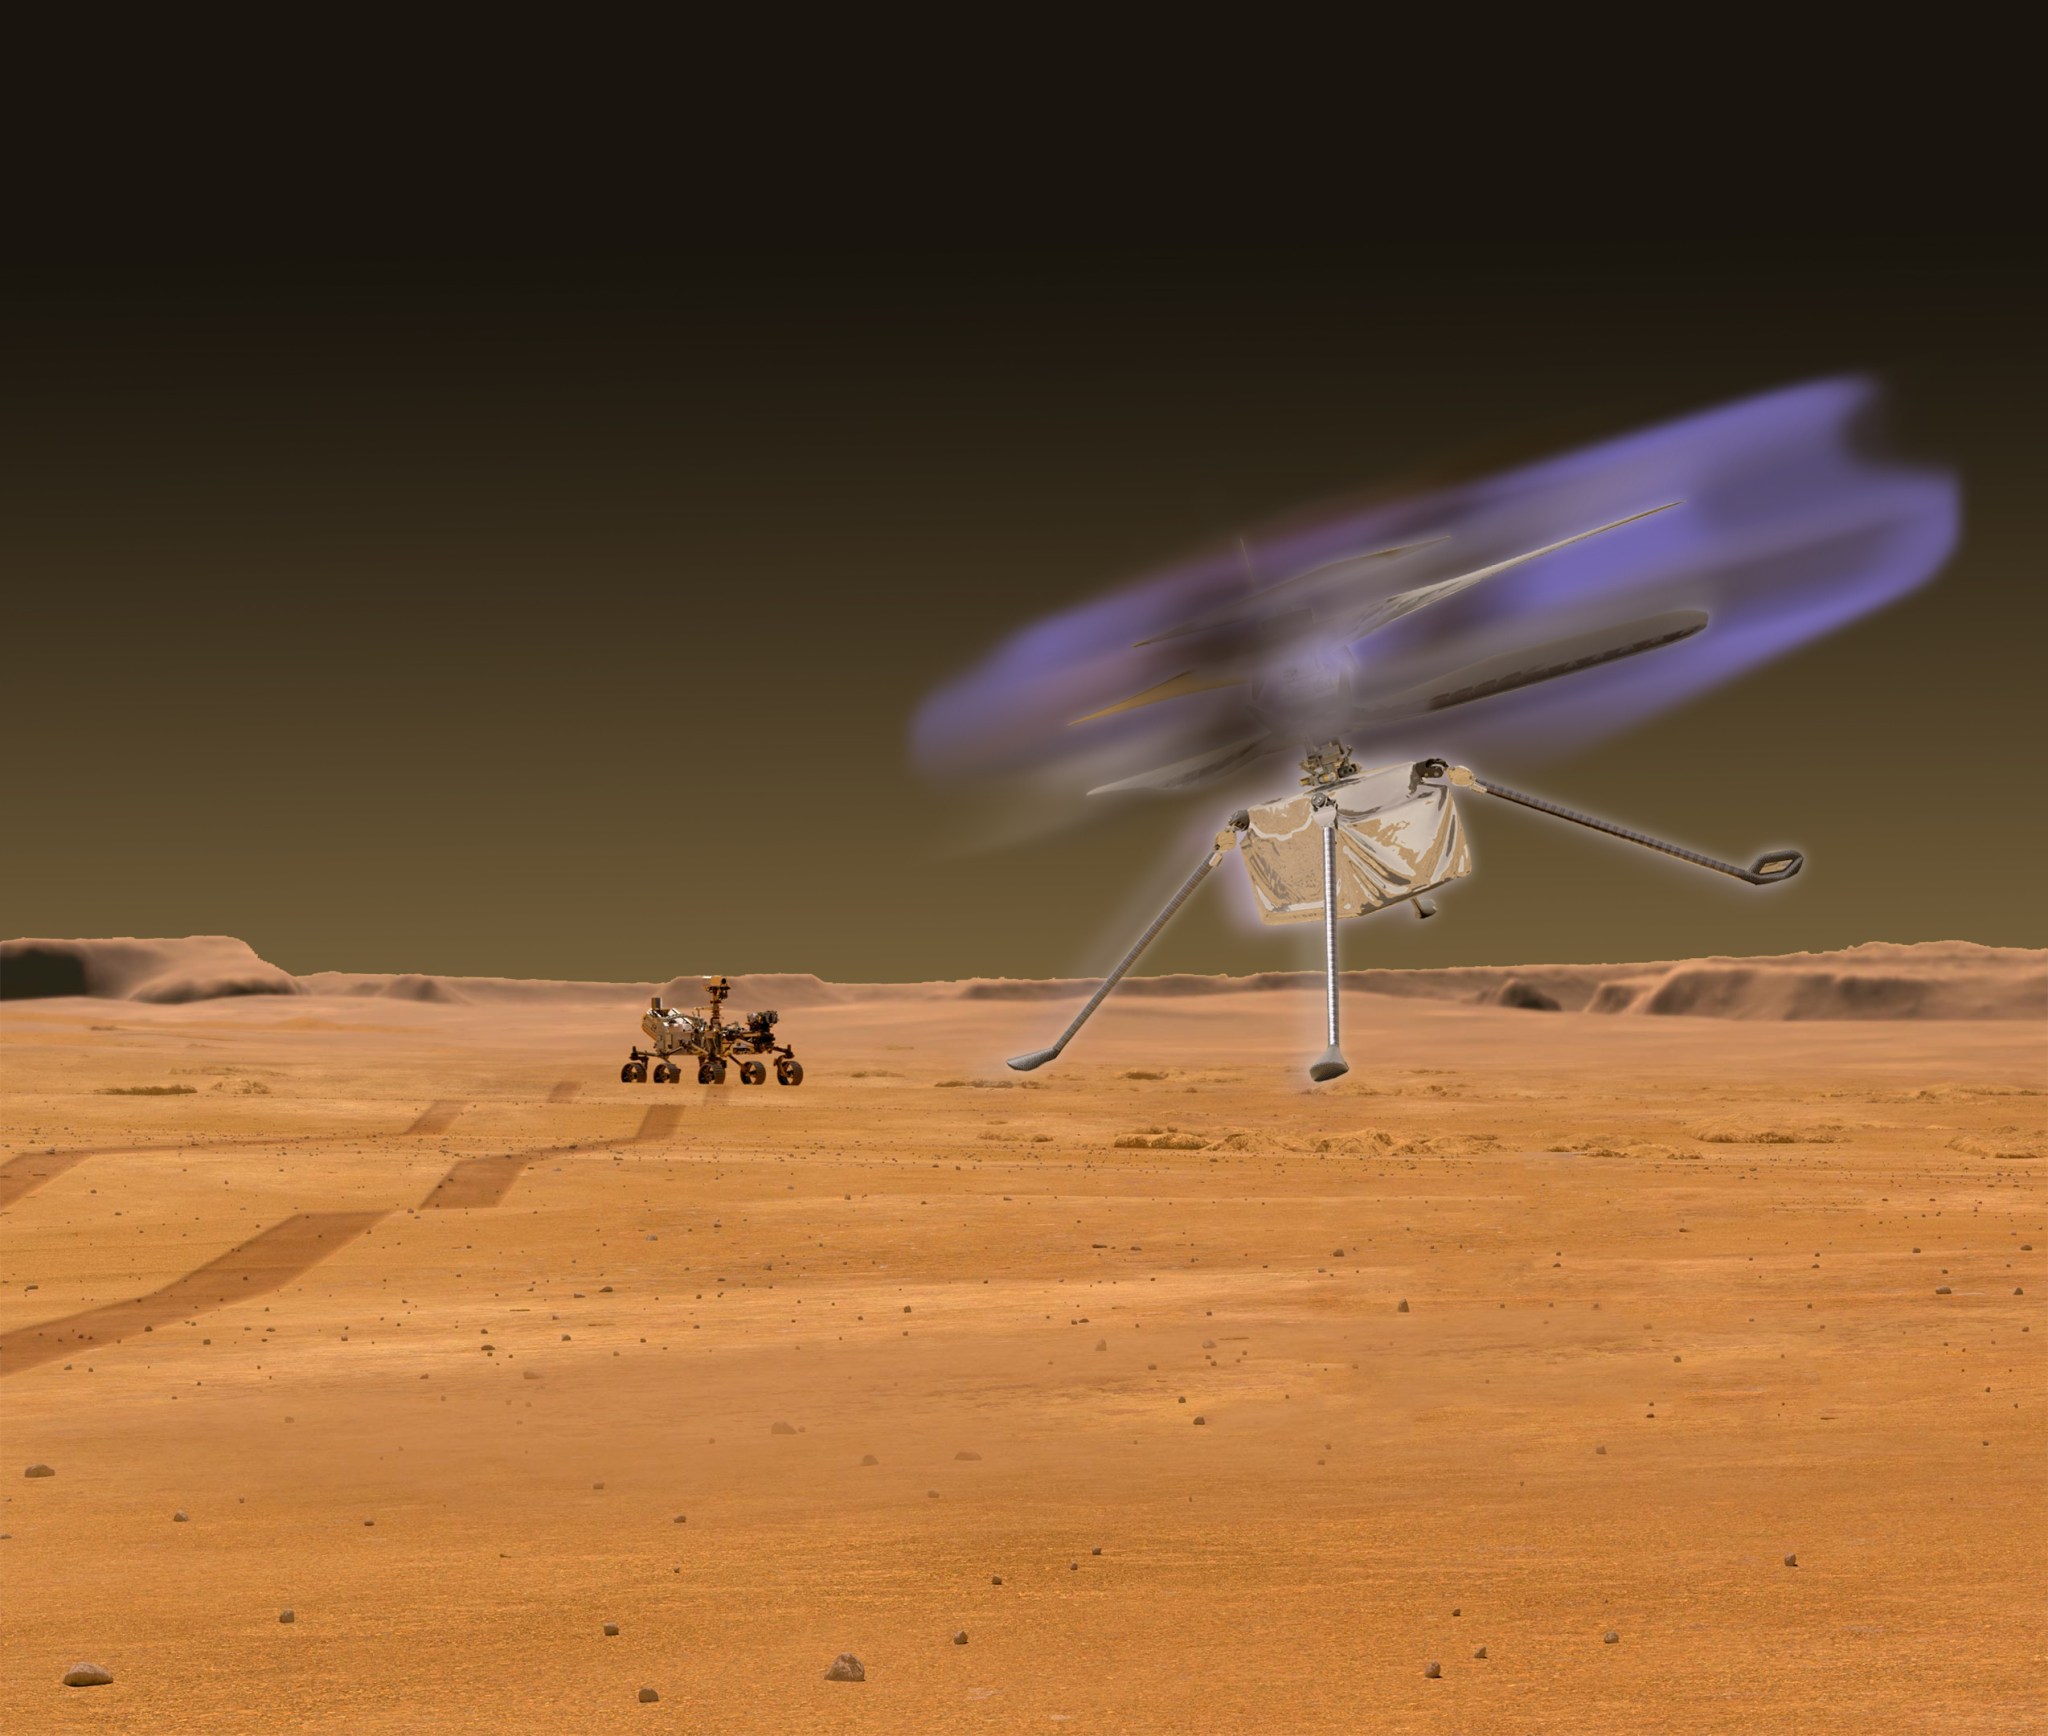 Artist's concept of Ingenuity helicopter glowing during flight